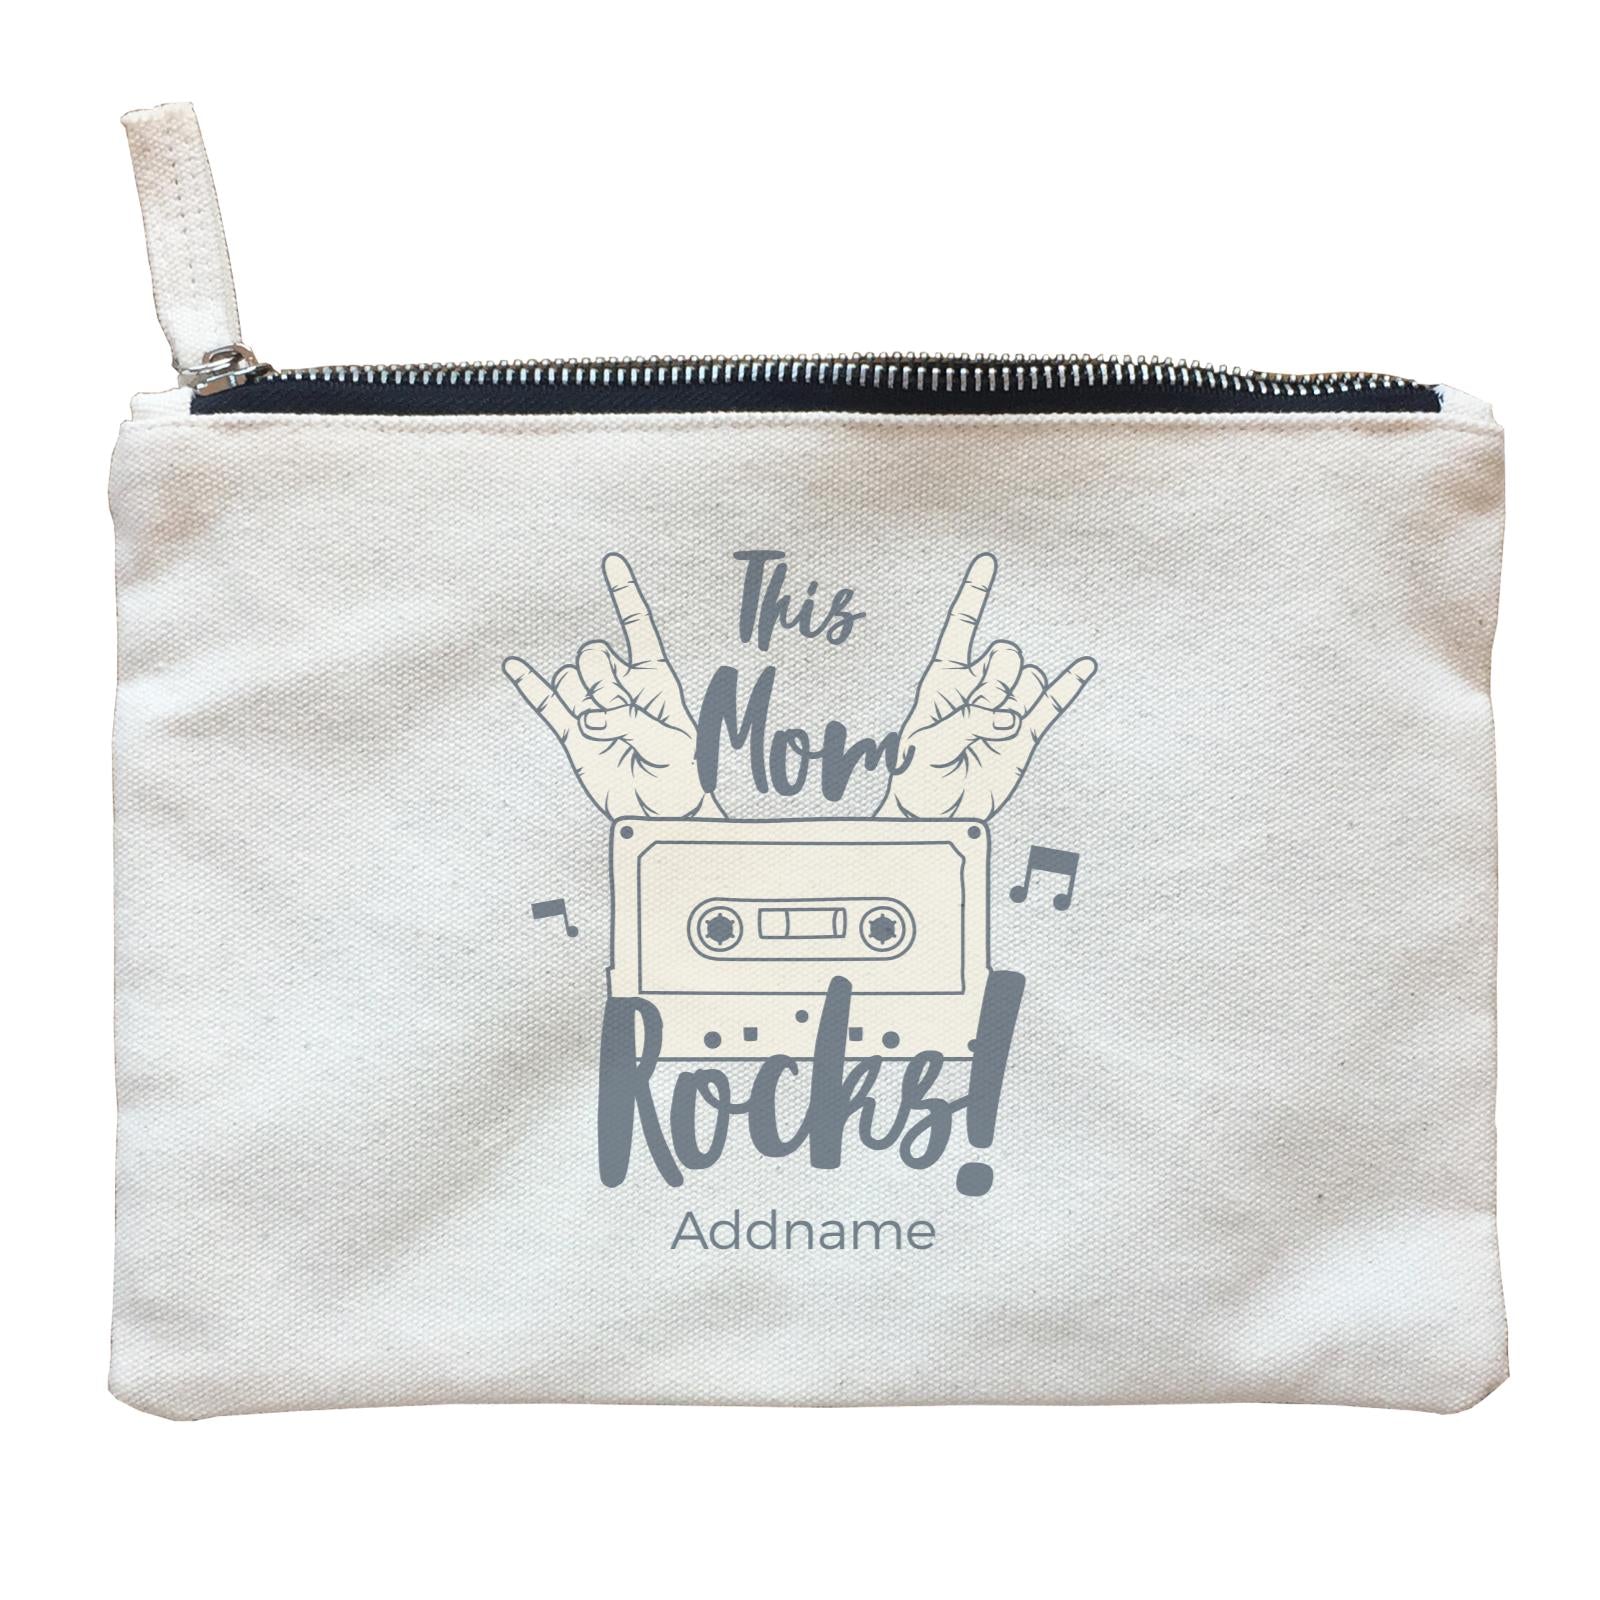 Awesome Mom 1 This Mom Rocks! Cassette Addname Zipper Pouch